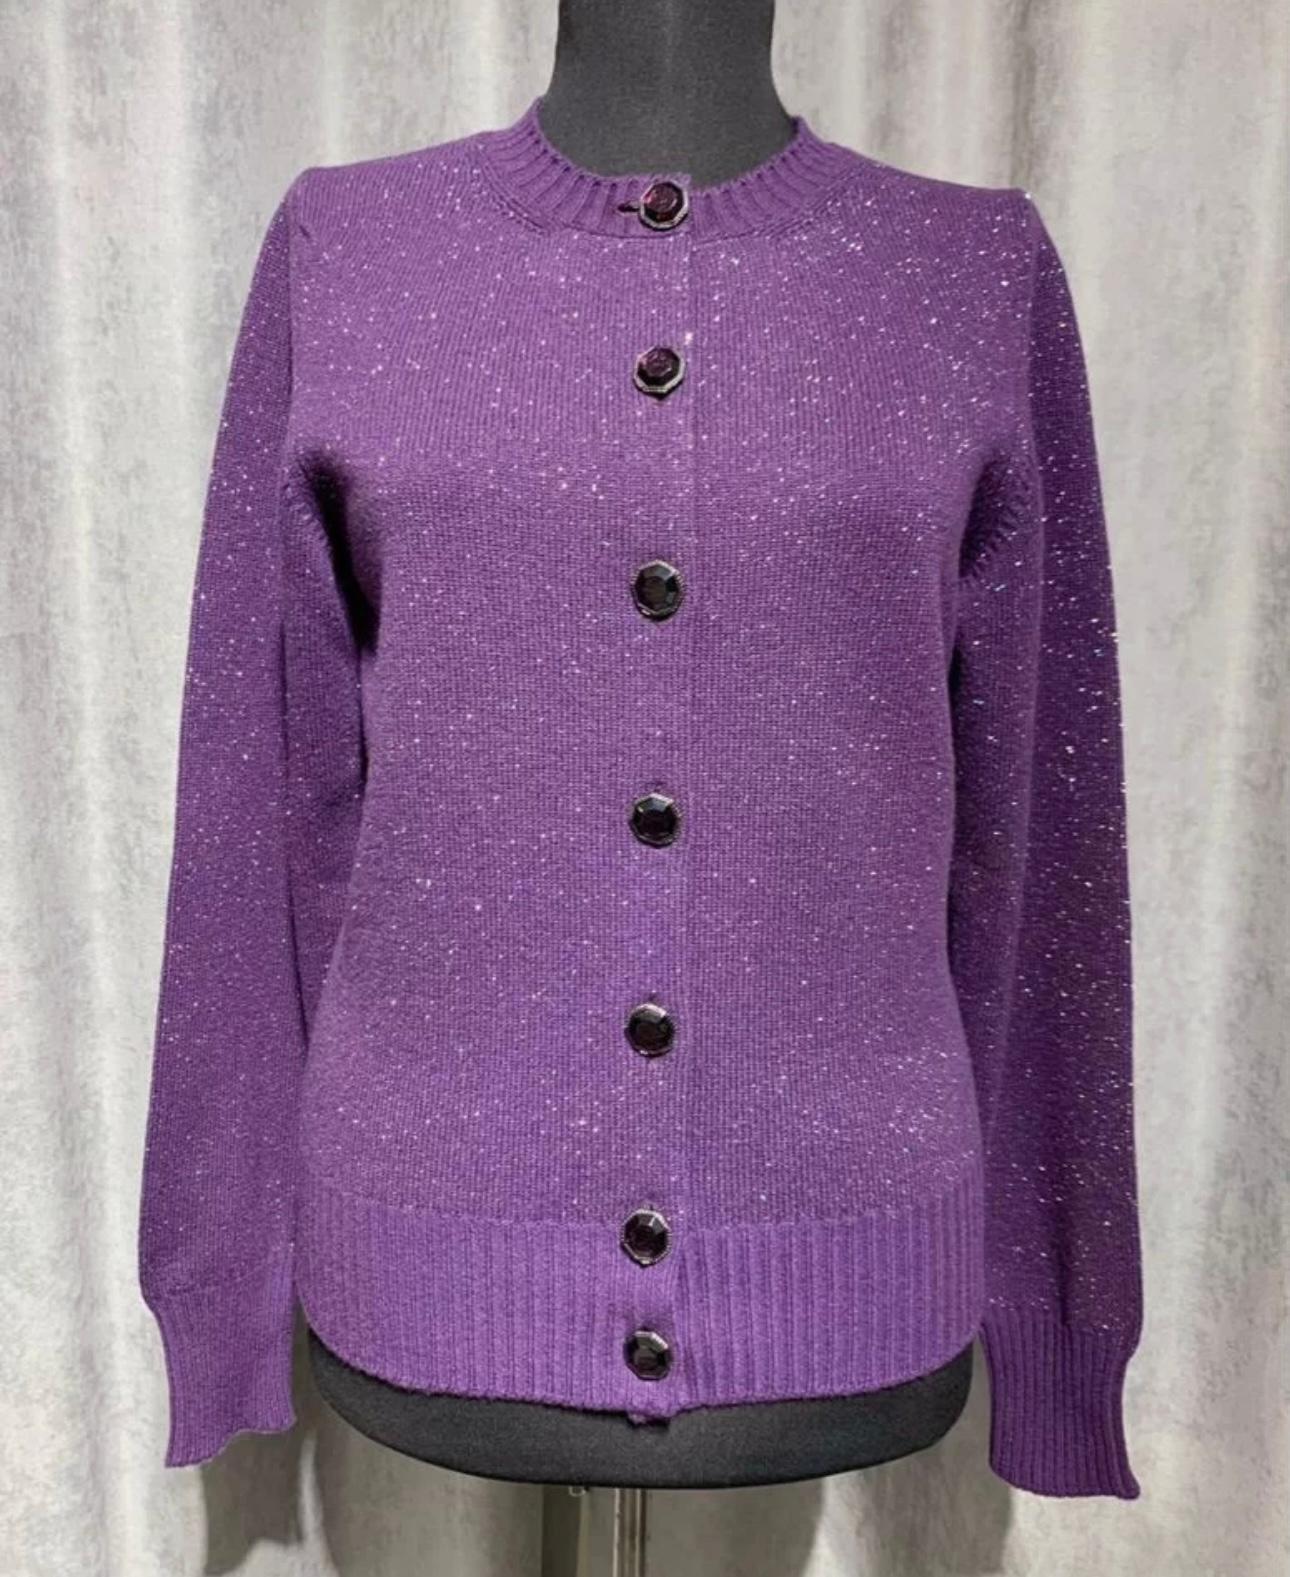 Women's or Men's Chanel Cara Delevingne Style Runway Cashmere Cardigan For Sale